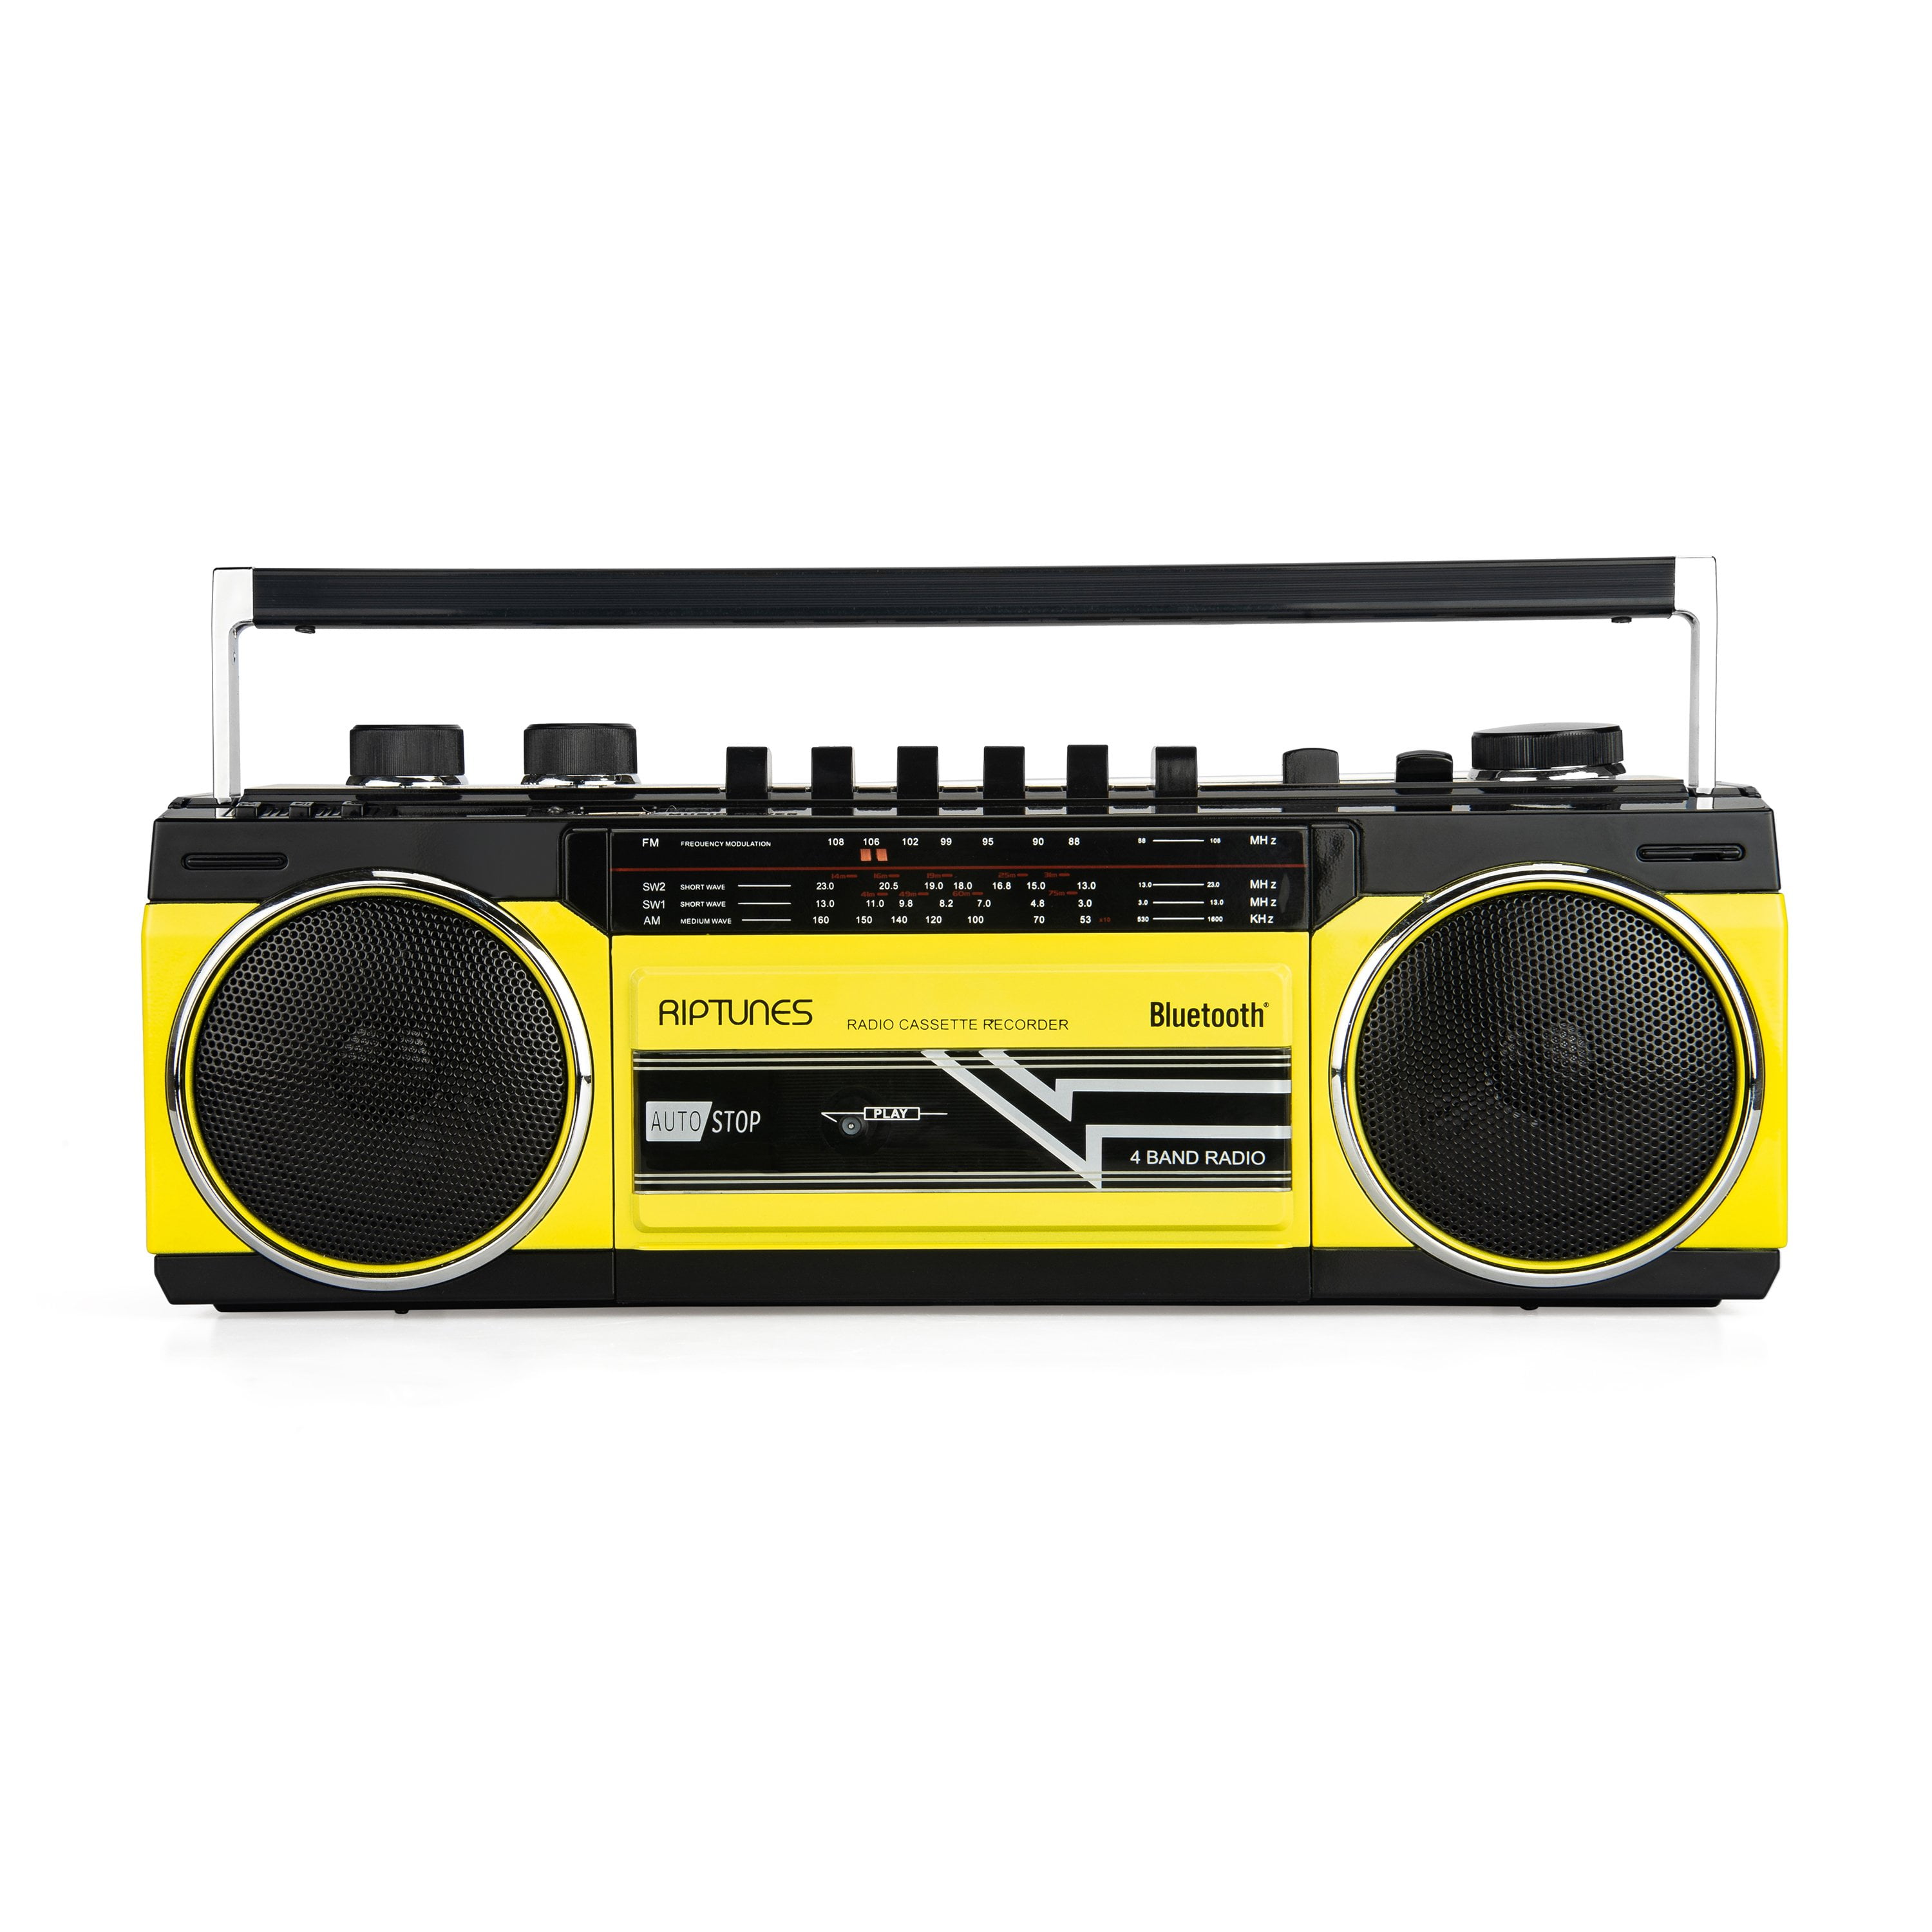 Cassette Player Recorder Boombox AM FM Radio Dual Stereo Speaker AC/Battery Operated & AUX /USB/ SD Port 